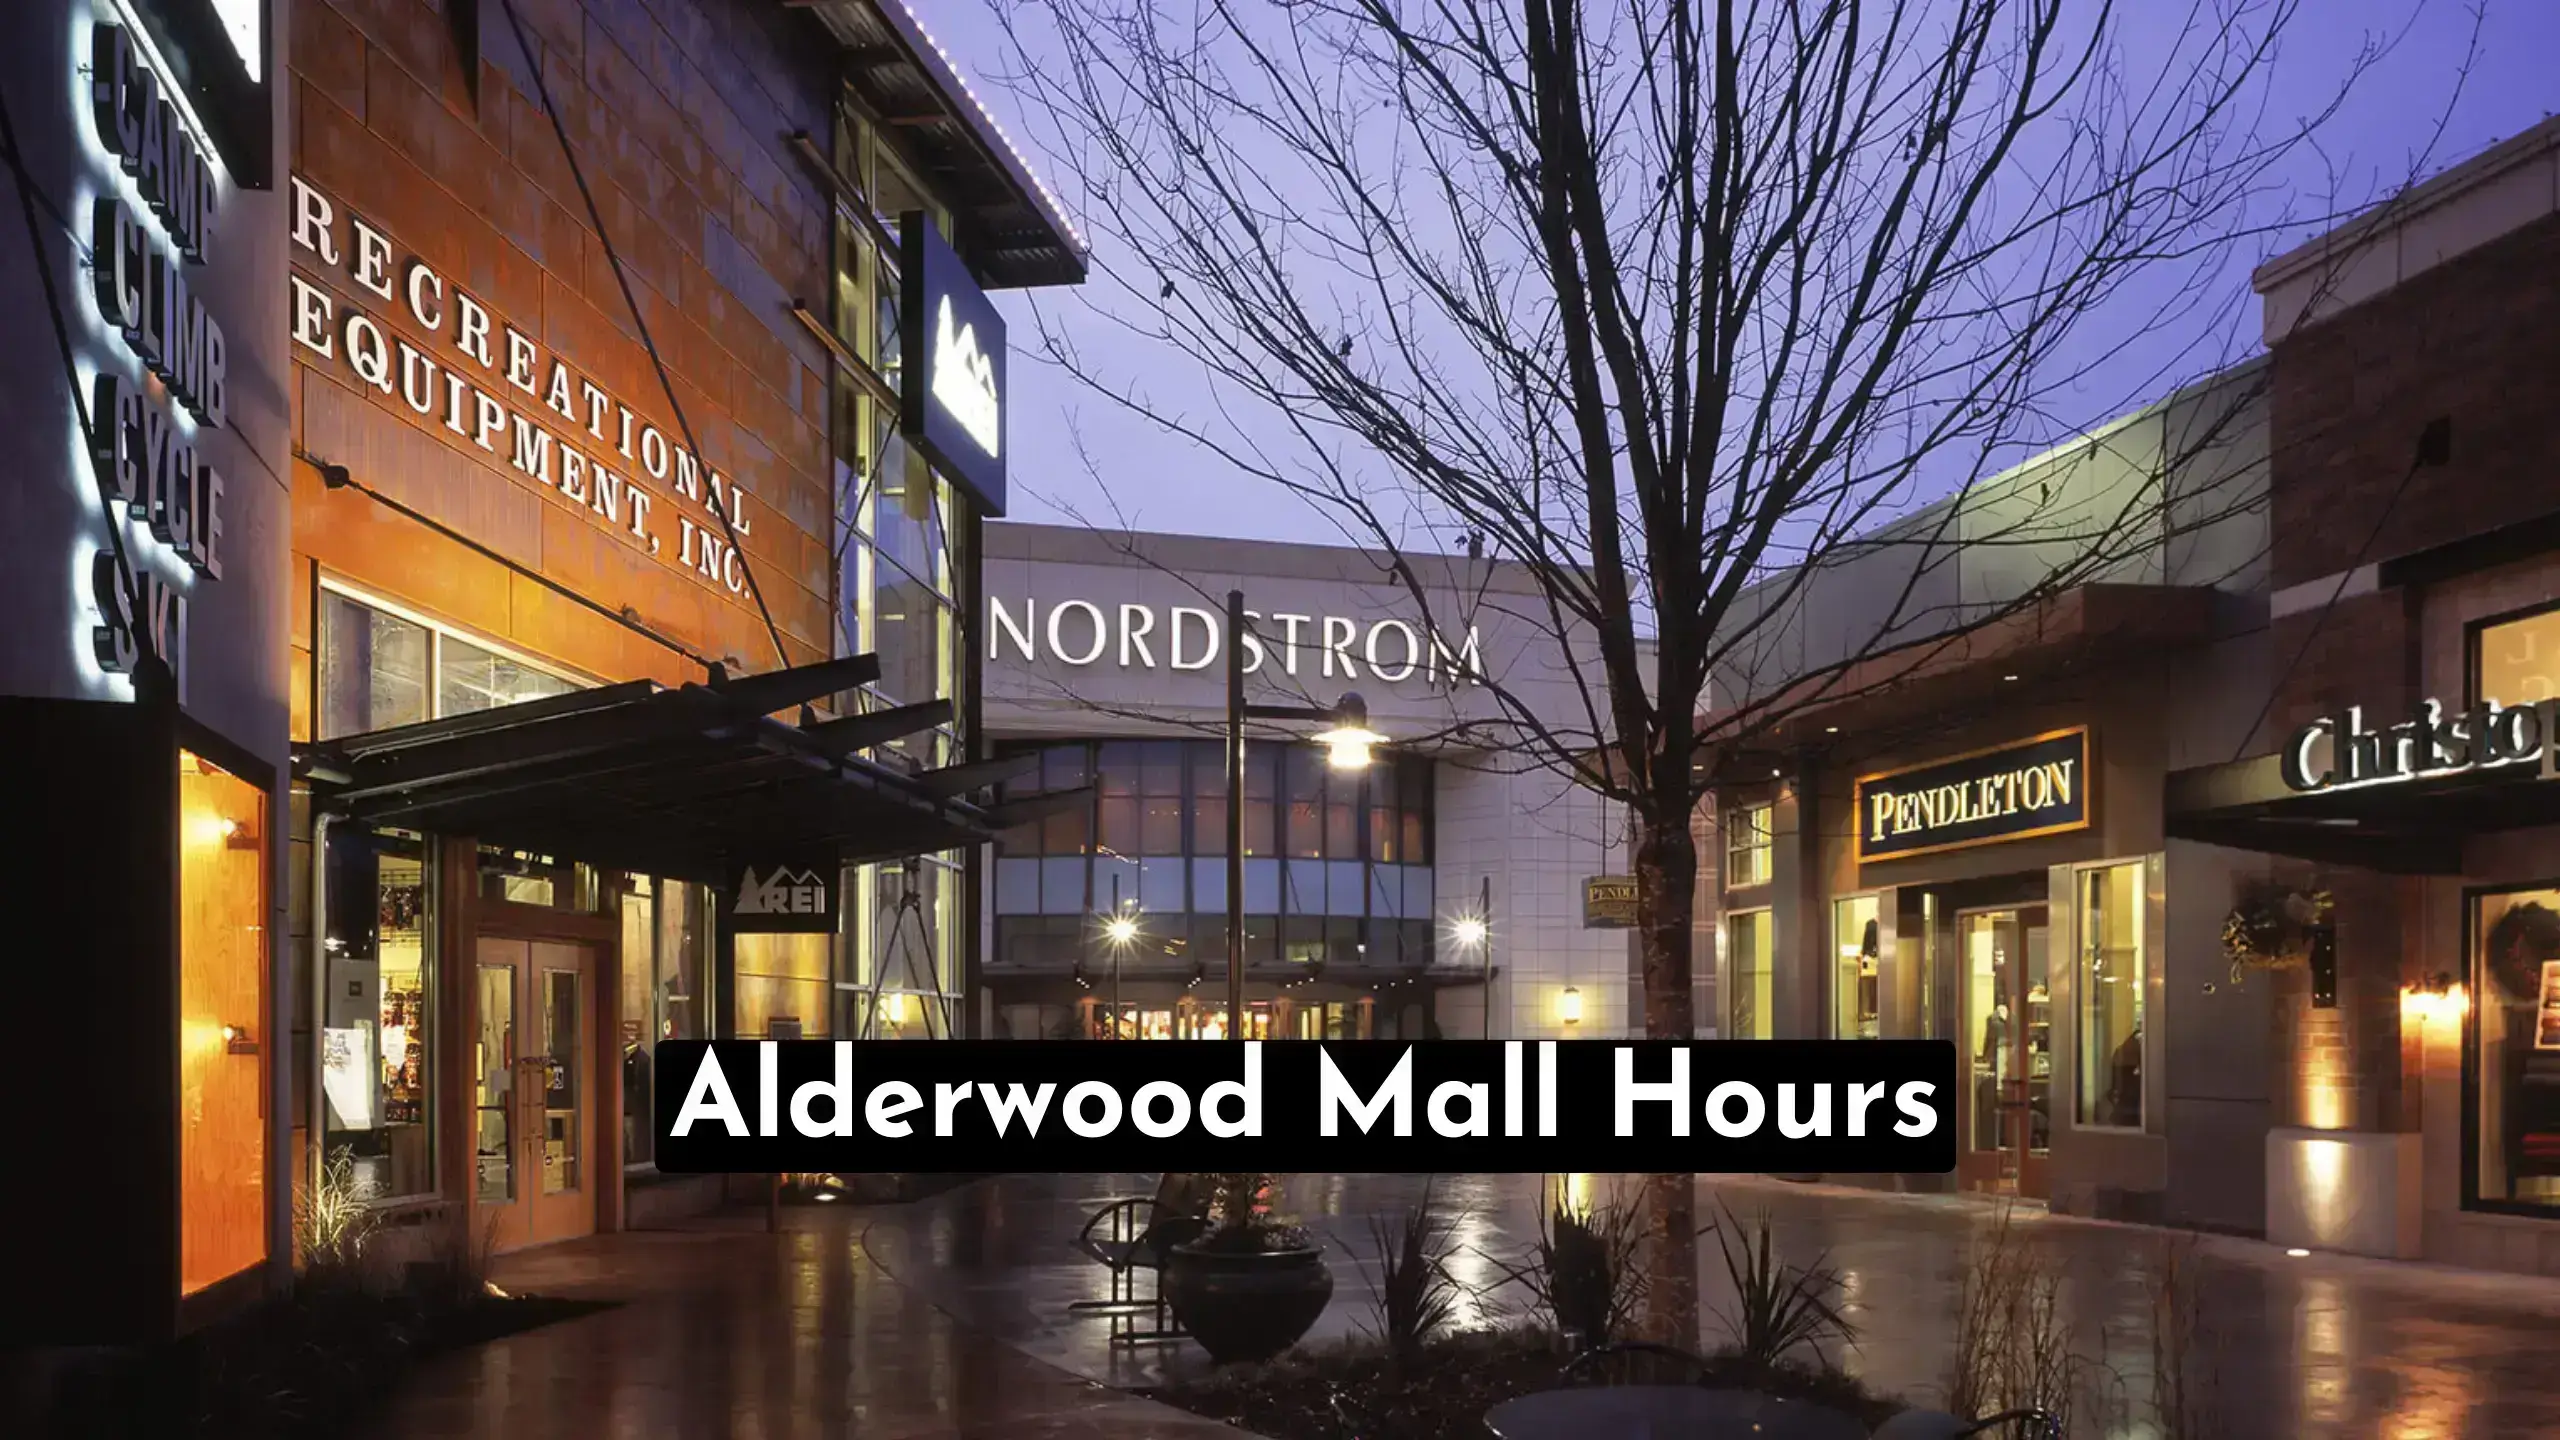 Discover Alderwood Mall Hours: Plan your shopping with the best deals and timings for 2023 at Lynnwood's premier retail destination.